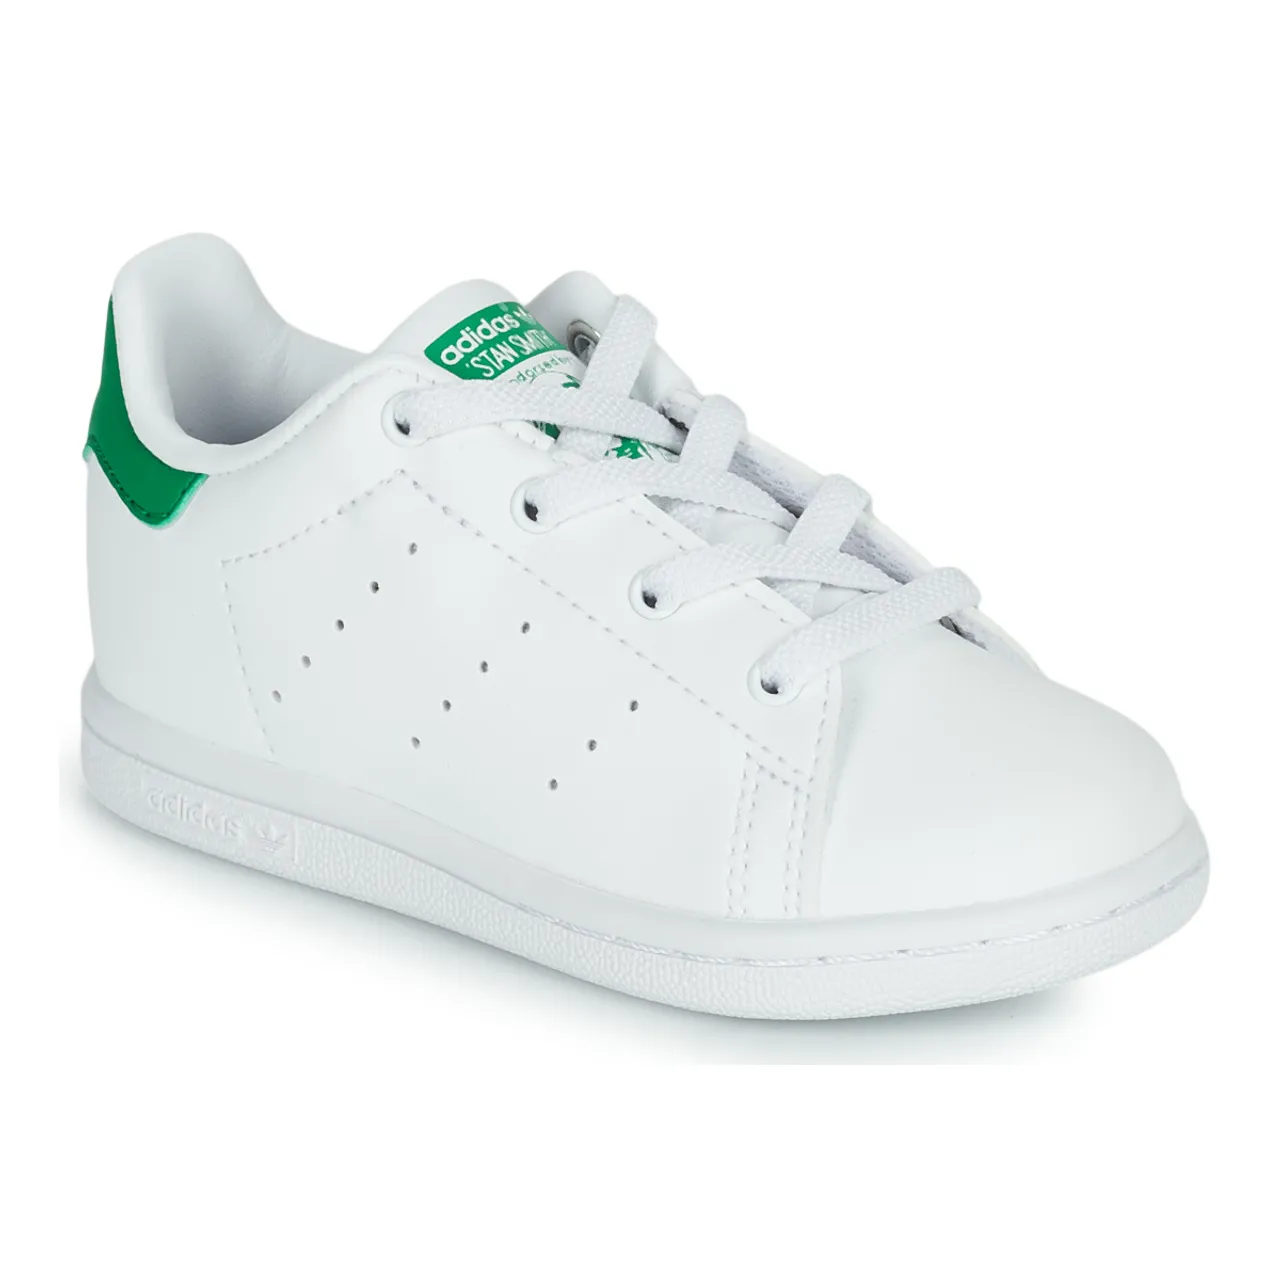 adidas  STAN SMITH EL I SUSTAINABLE  boys's Children's Shoes (Trainers) in White